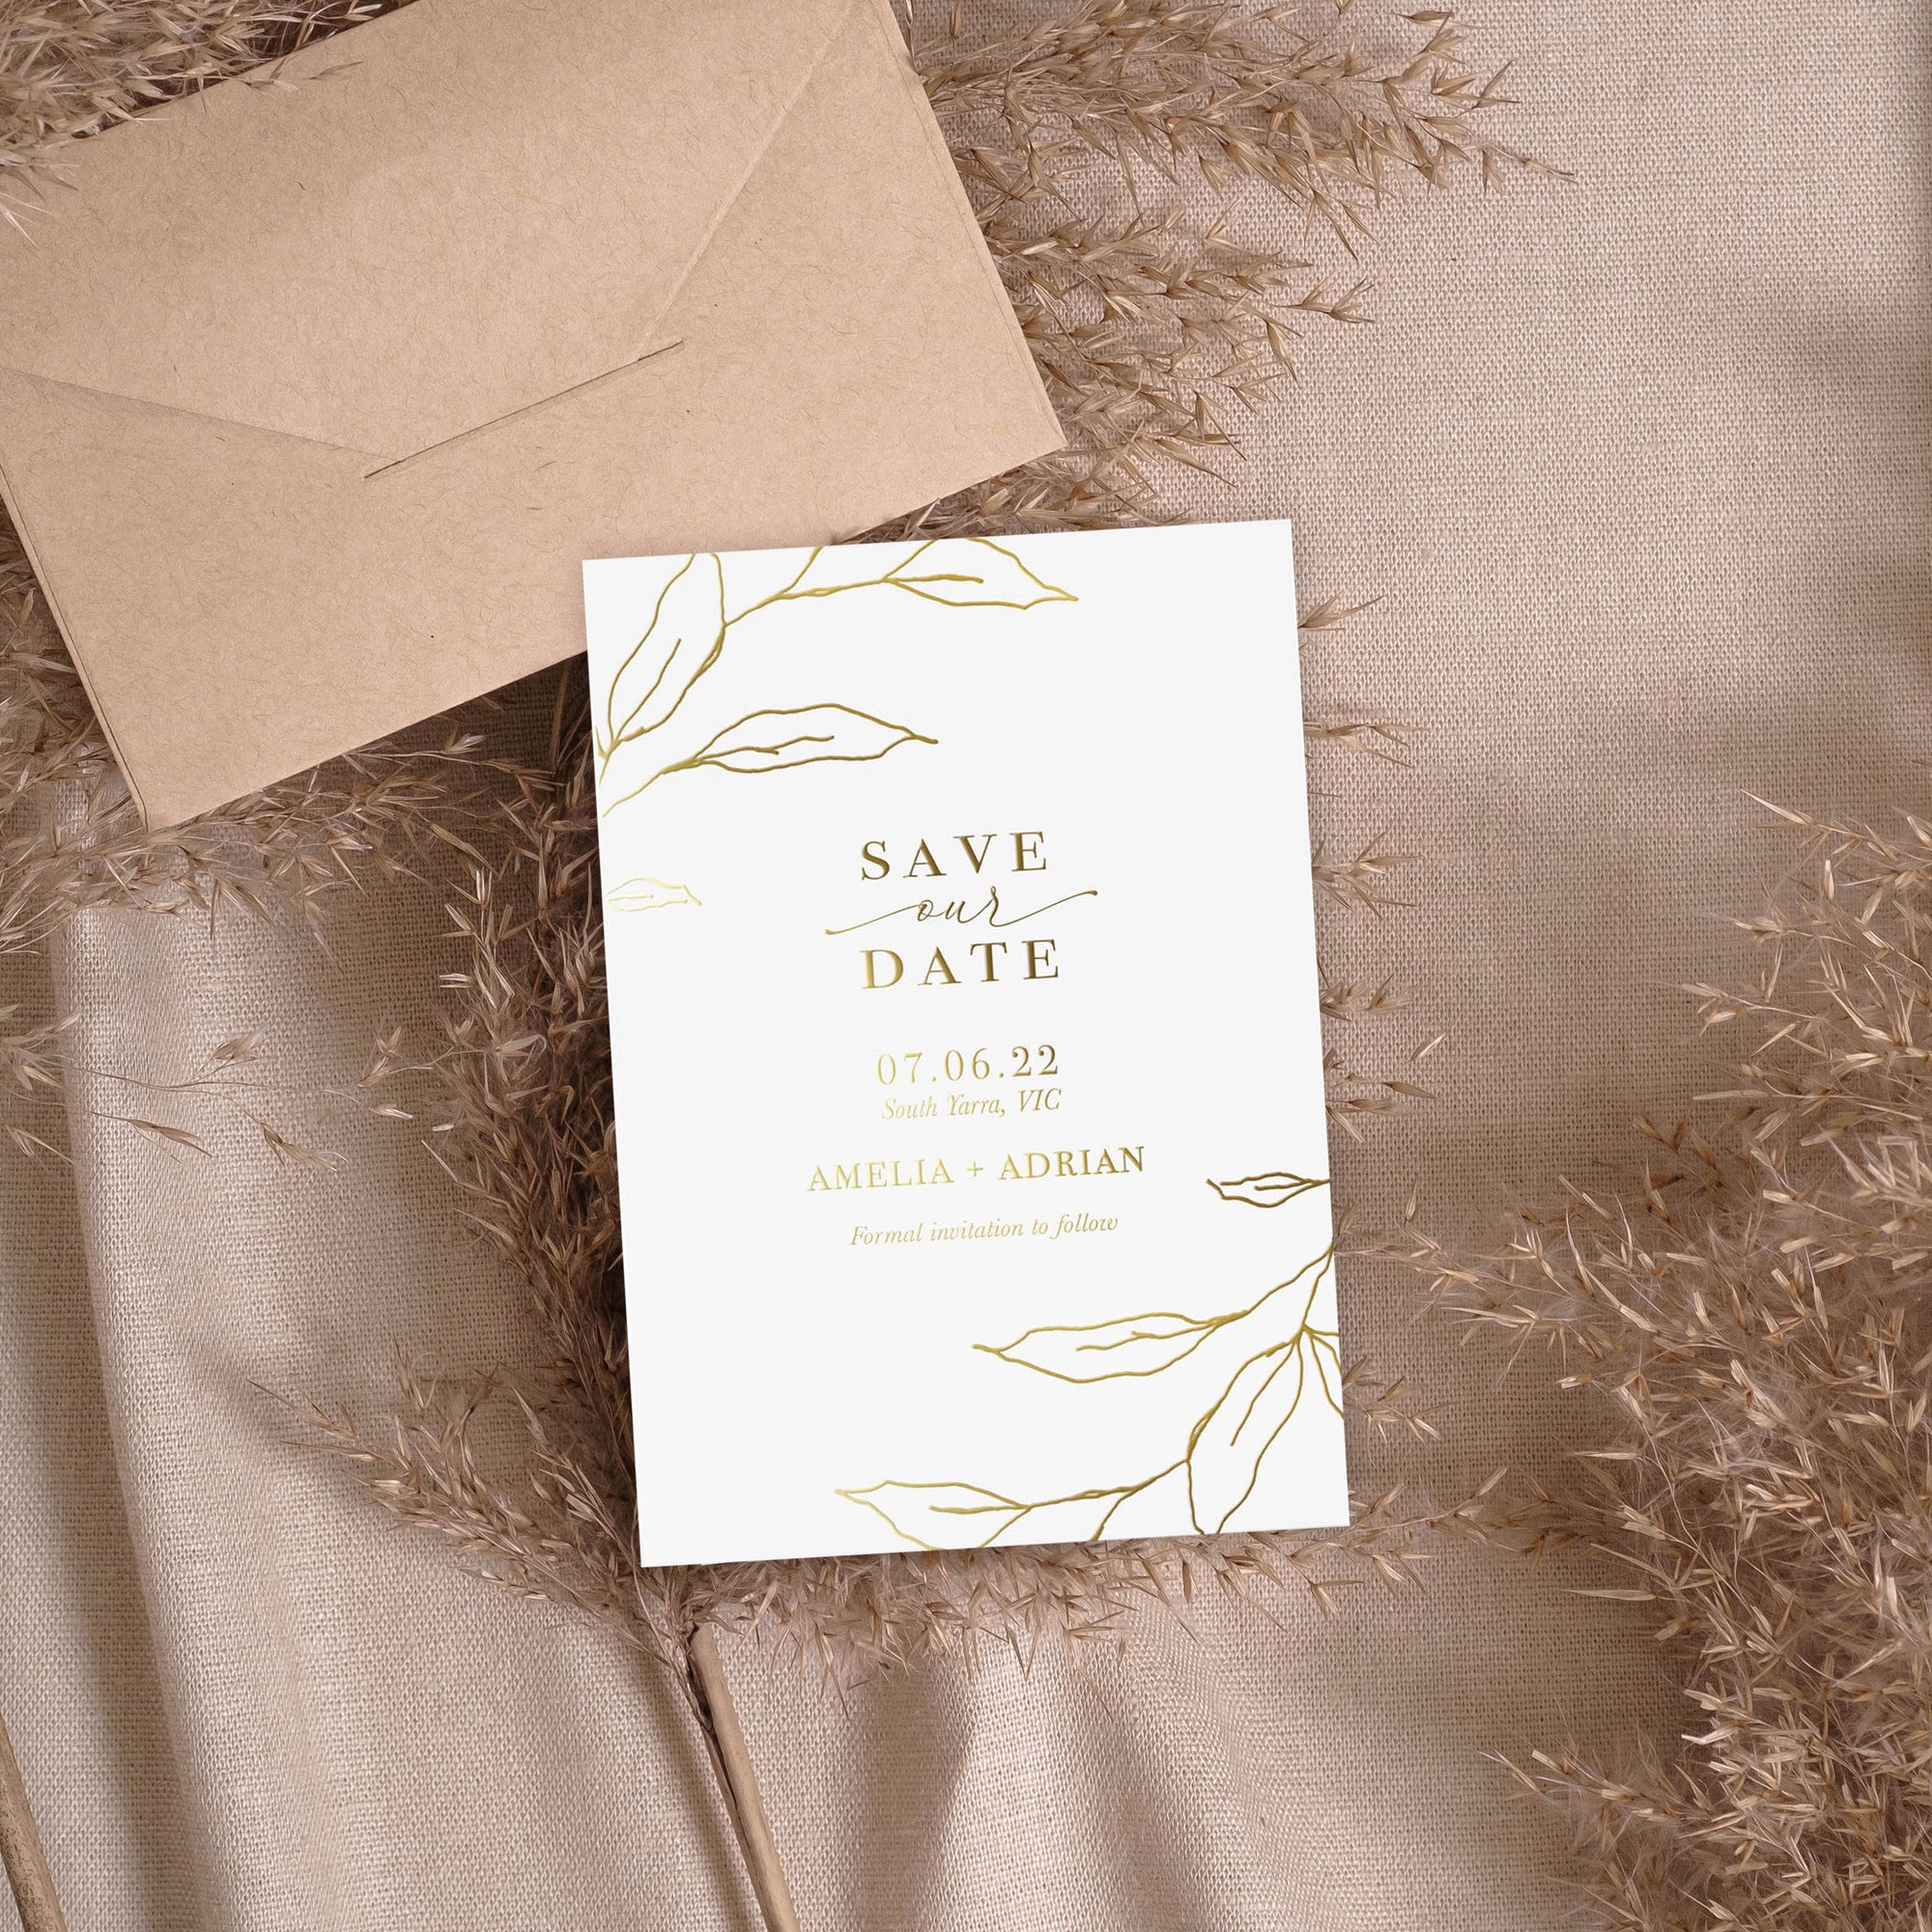 Our Date | Save the Date Cards